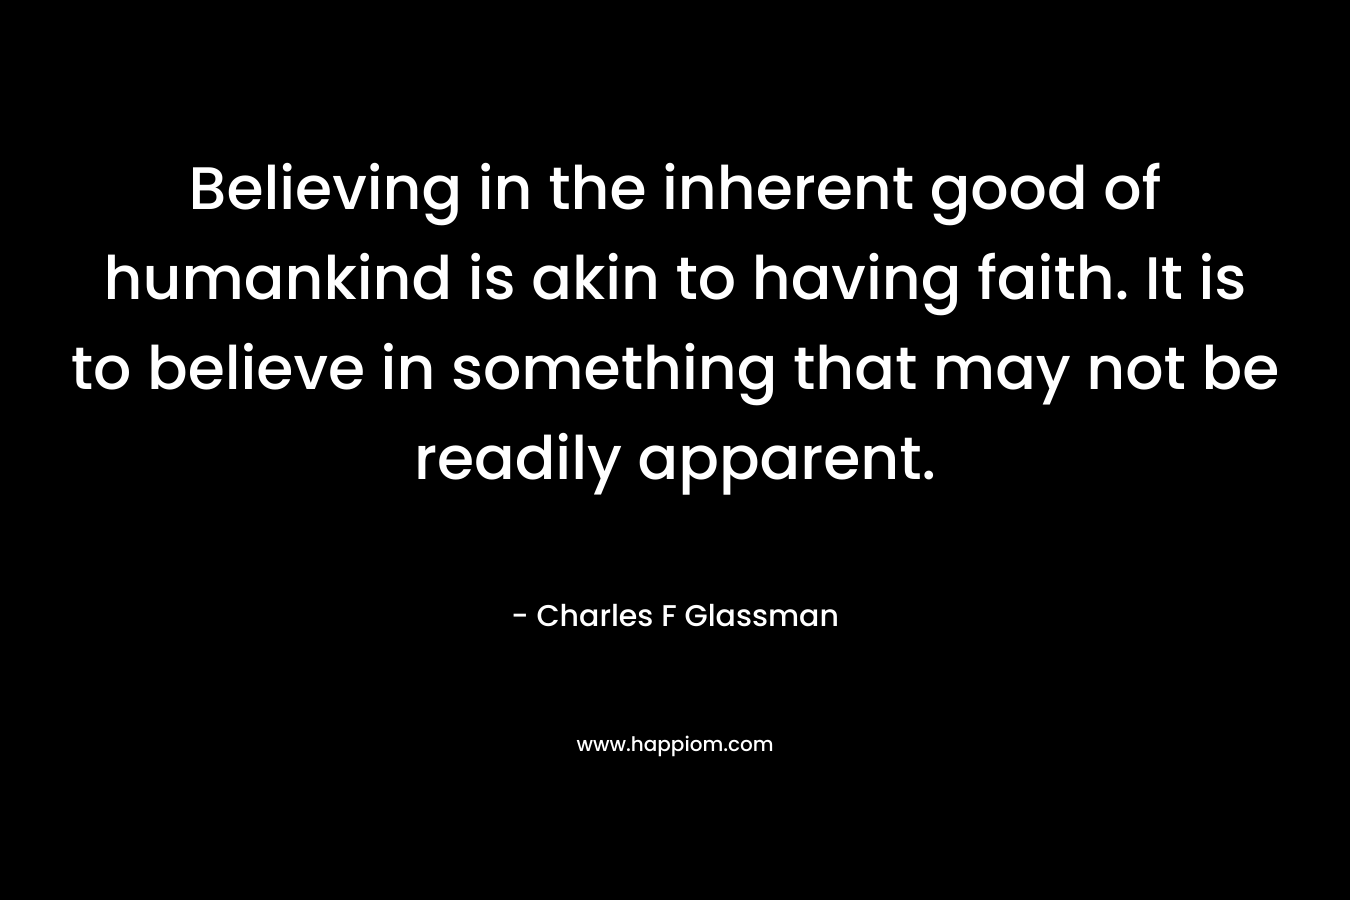 Believing in the inherent good of humankind is akin to having faith. It is to believe in something that may not be readily apparent.